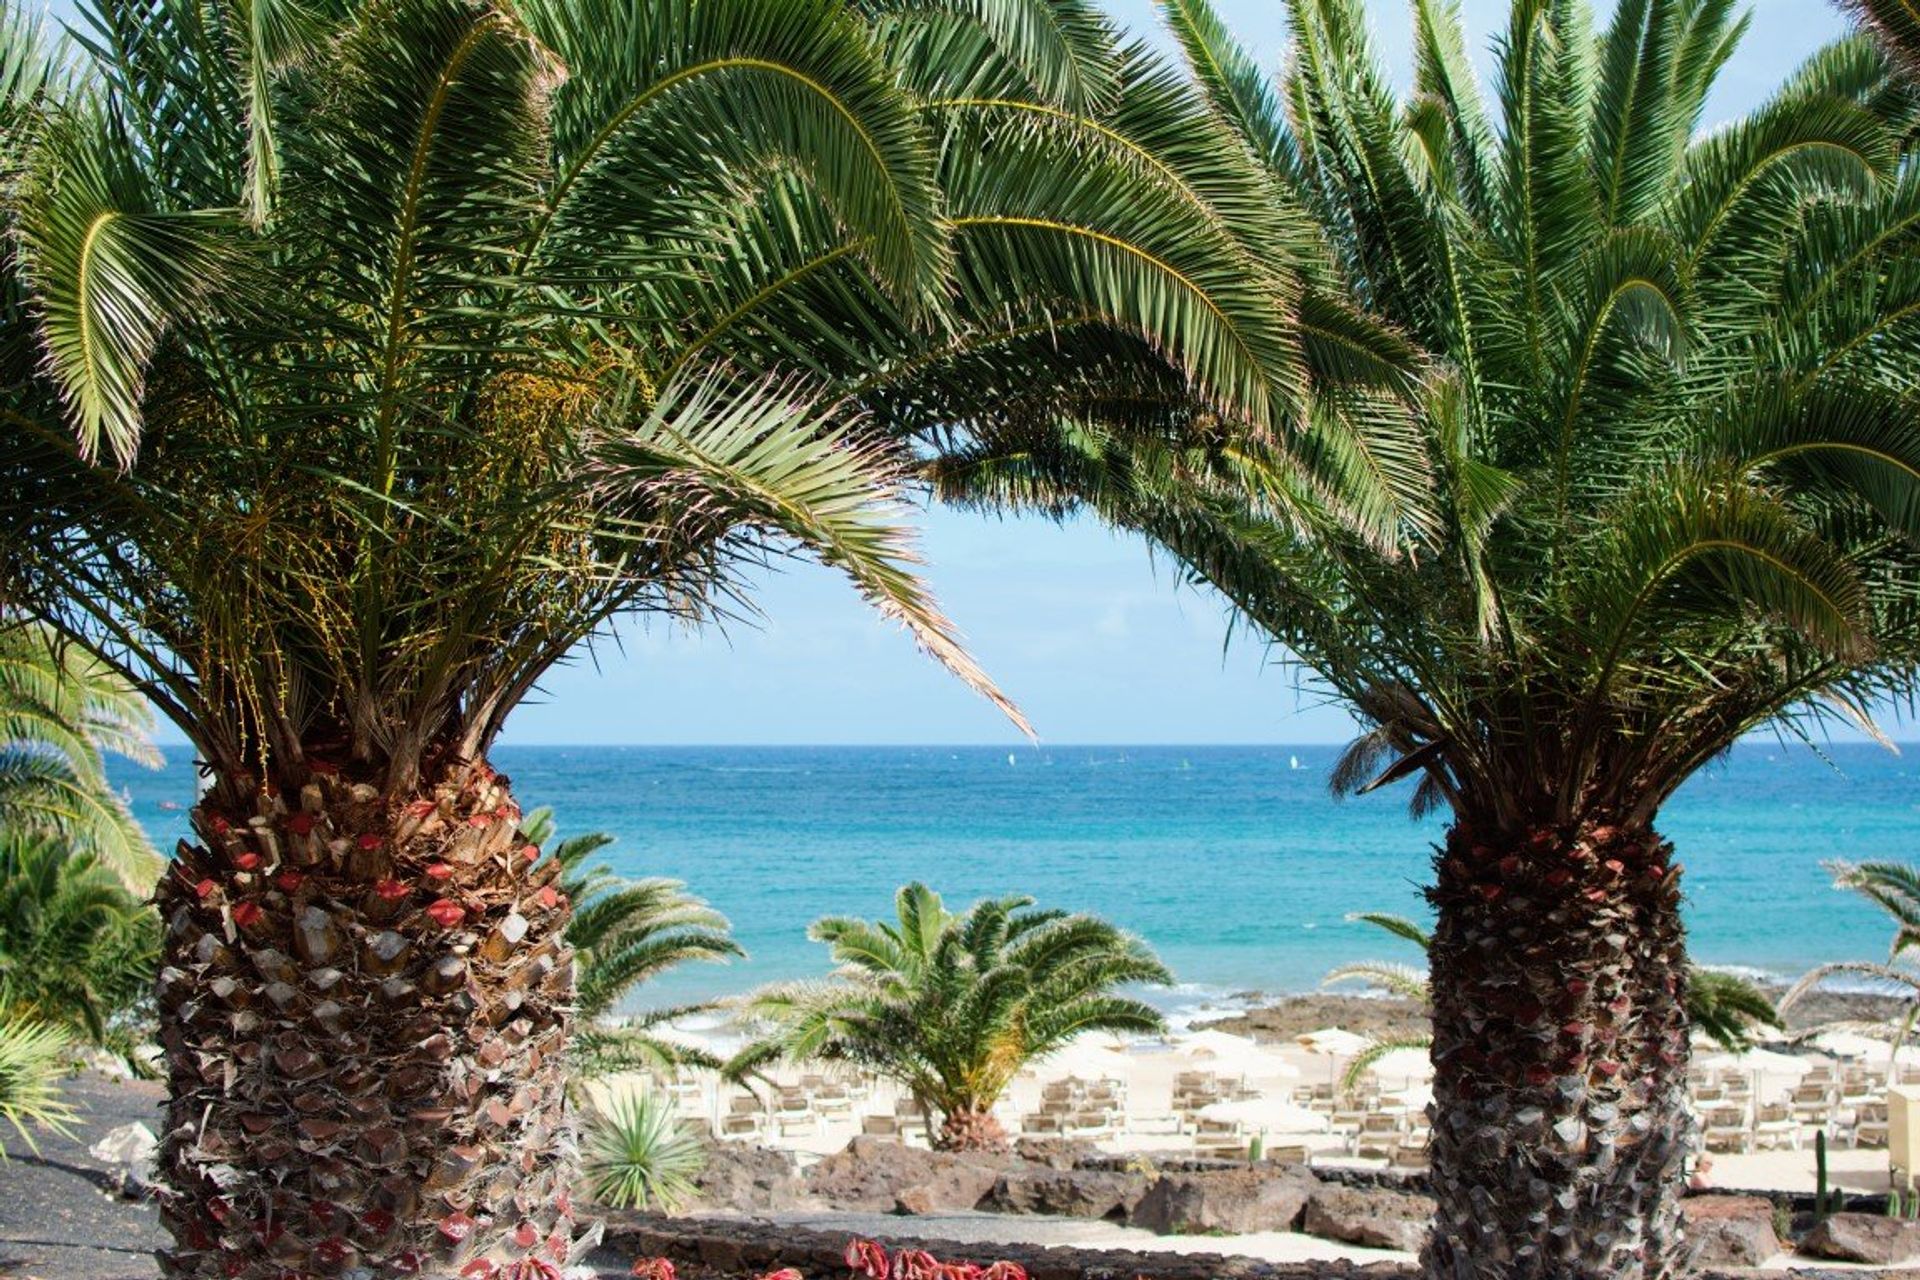 Costa Teguise's beautiful coast is lined with tropical palm trees